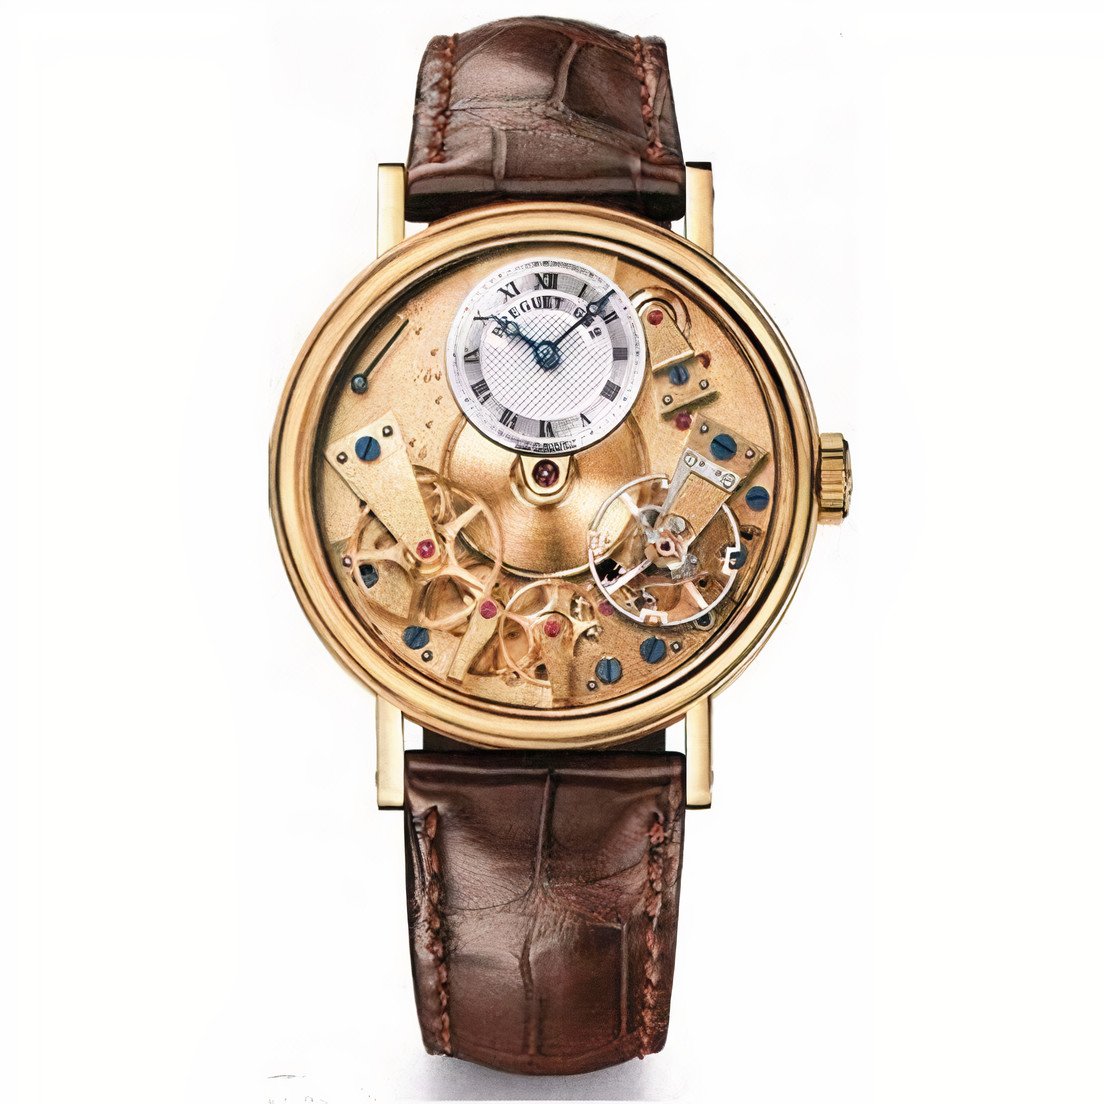 15 Most Expensive Watch Brands in the World – GoldWiser Conroe